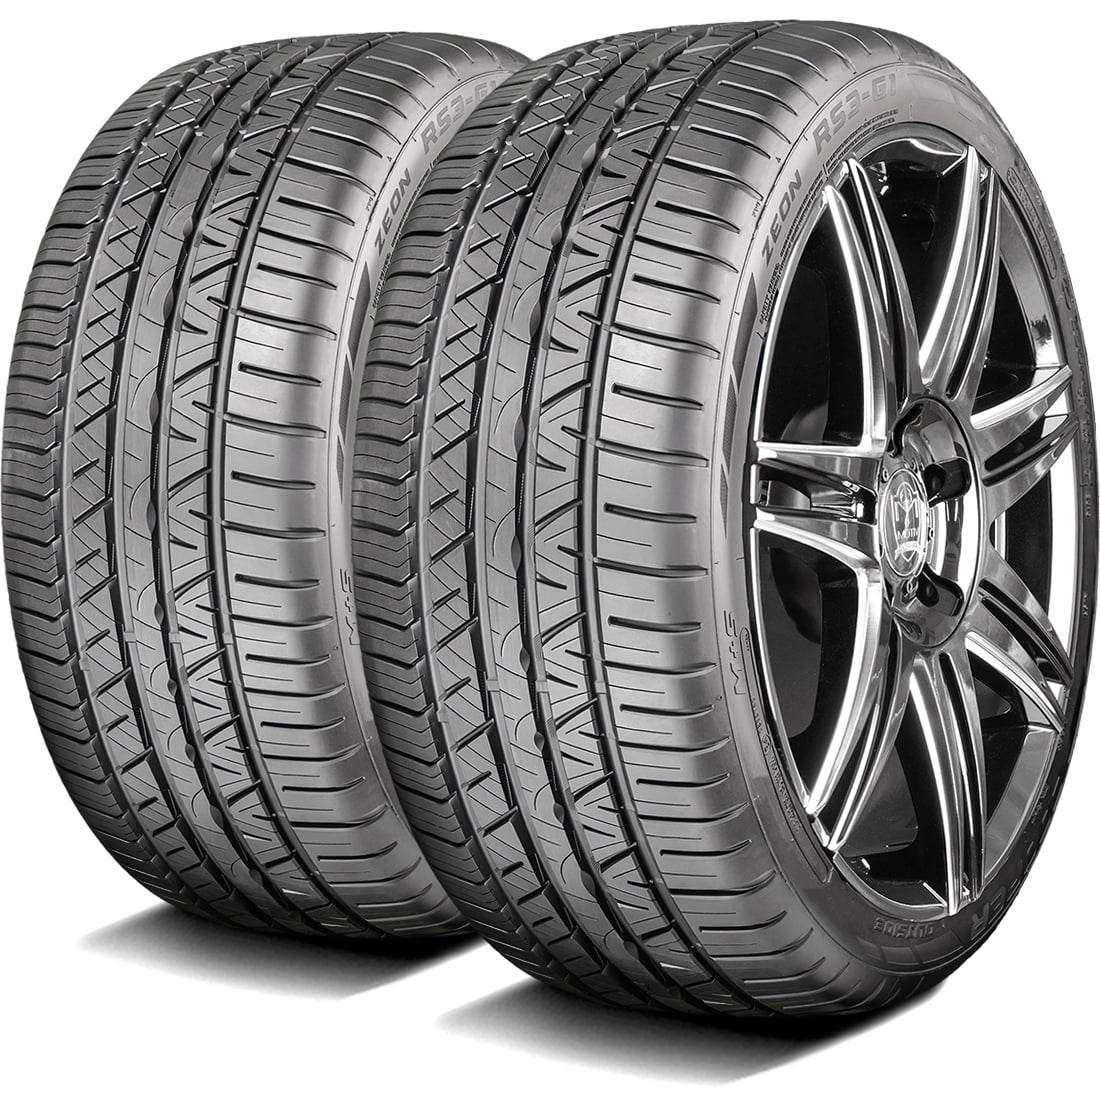 Pair of 2 (TWO) Cooper Zeon RS3-G1 305/30R19 102W XL A/S Performance Tires